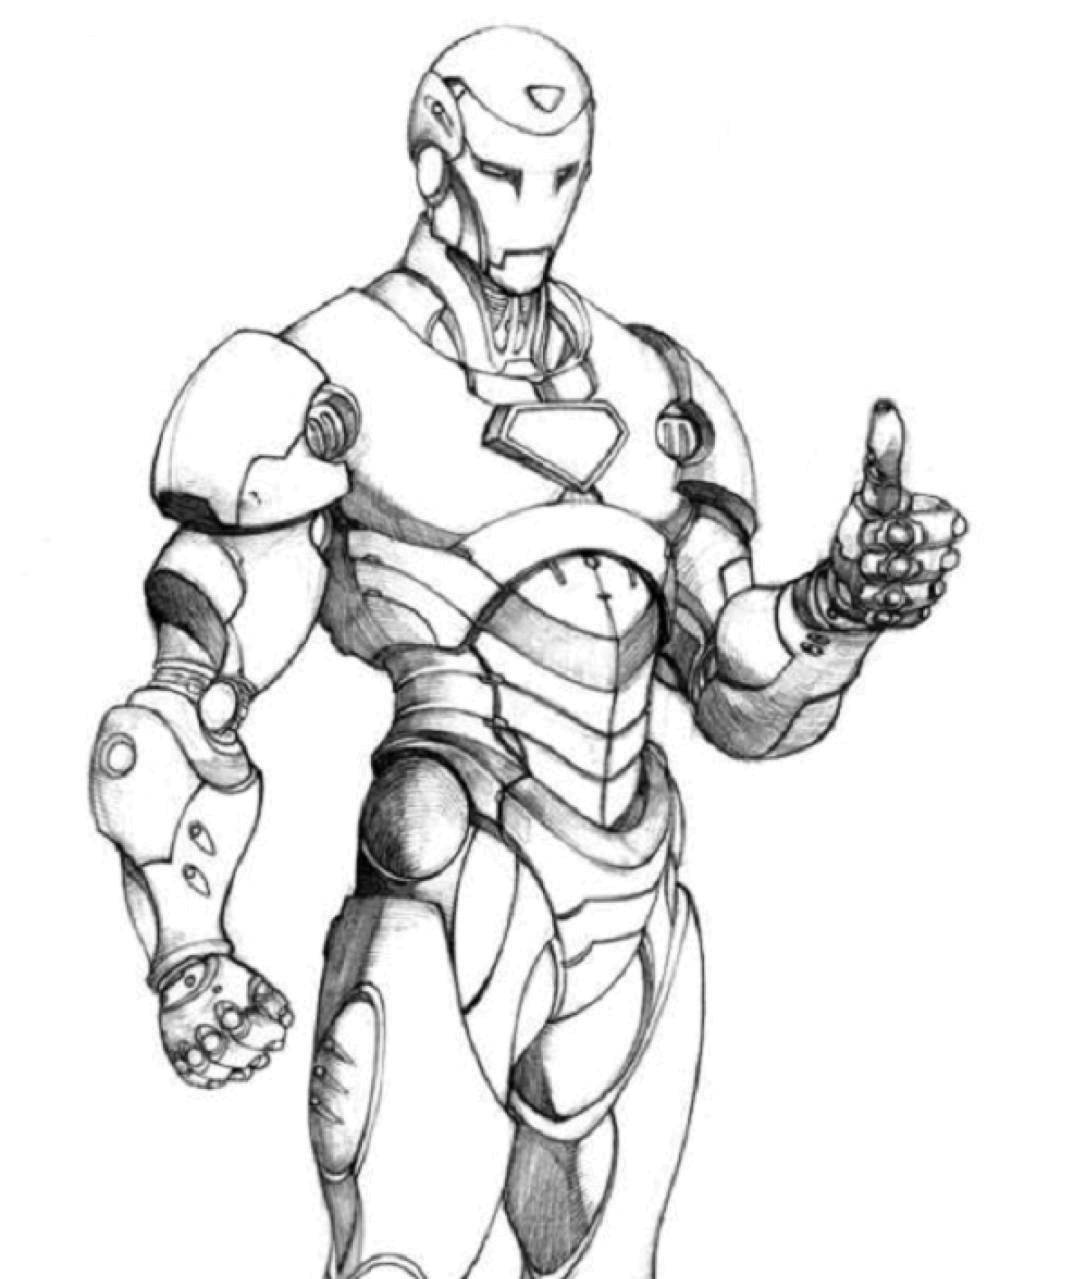 Coloring Iron man. Category For boys . Tags:  for boys, superheroes, iron man.